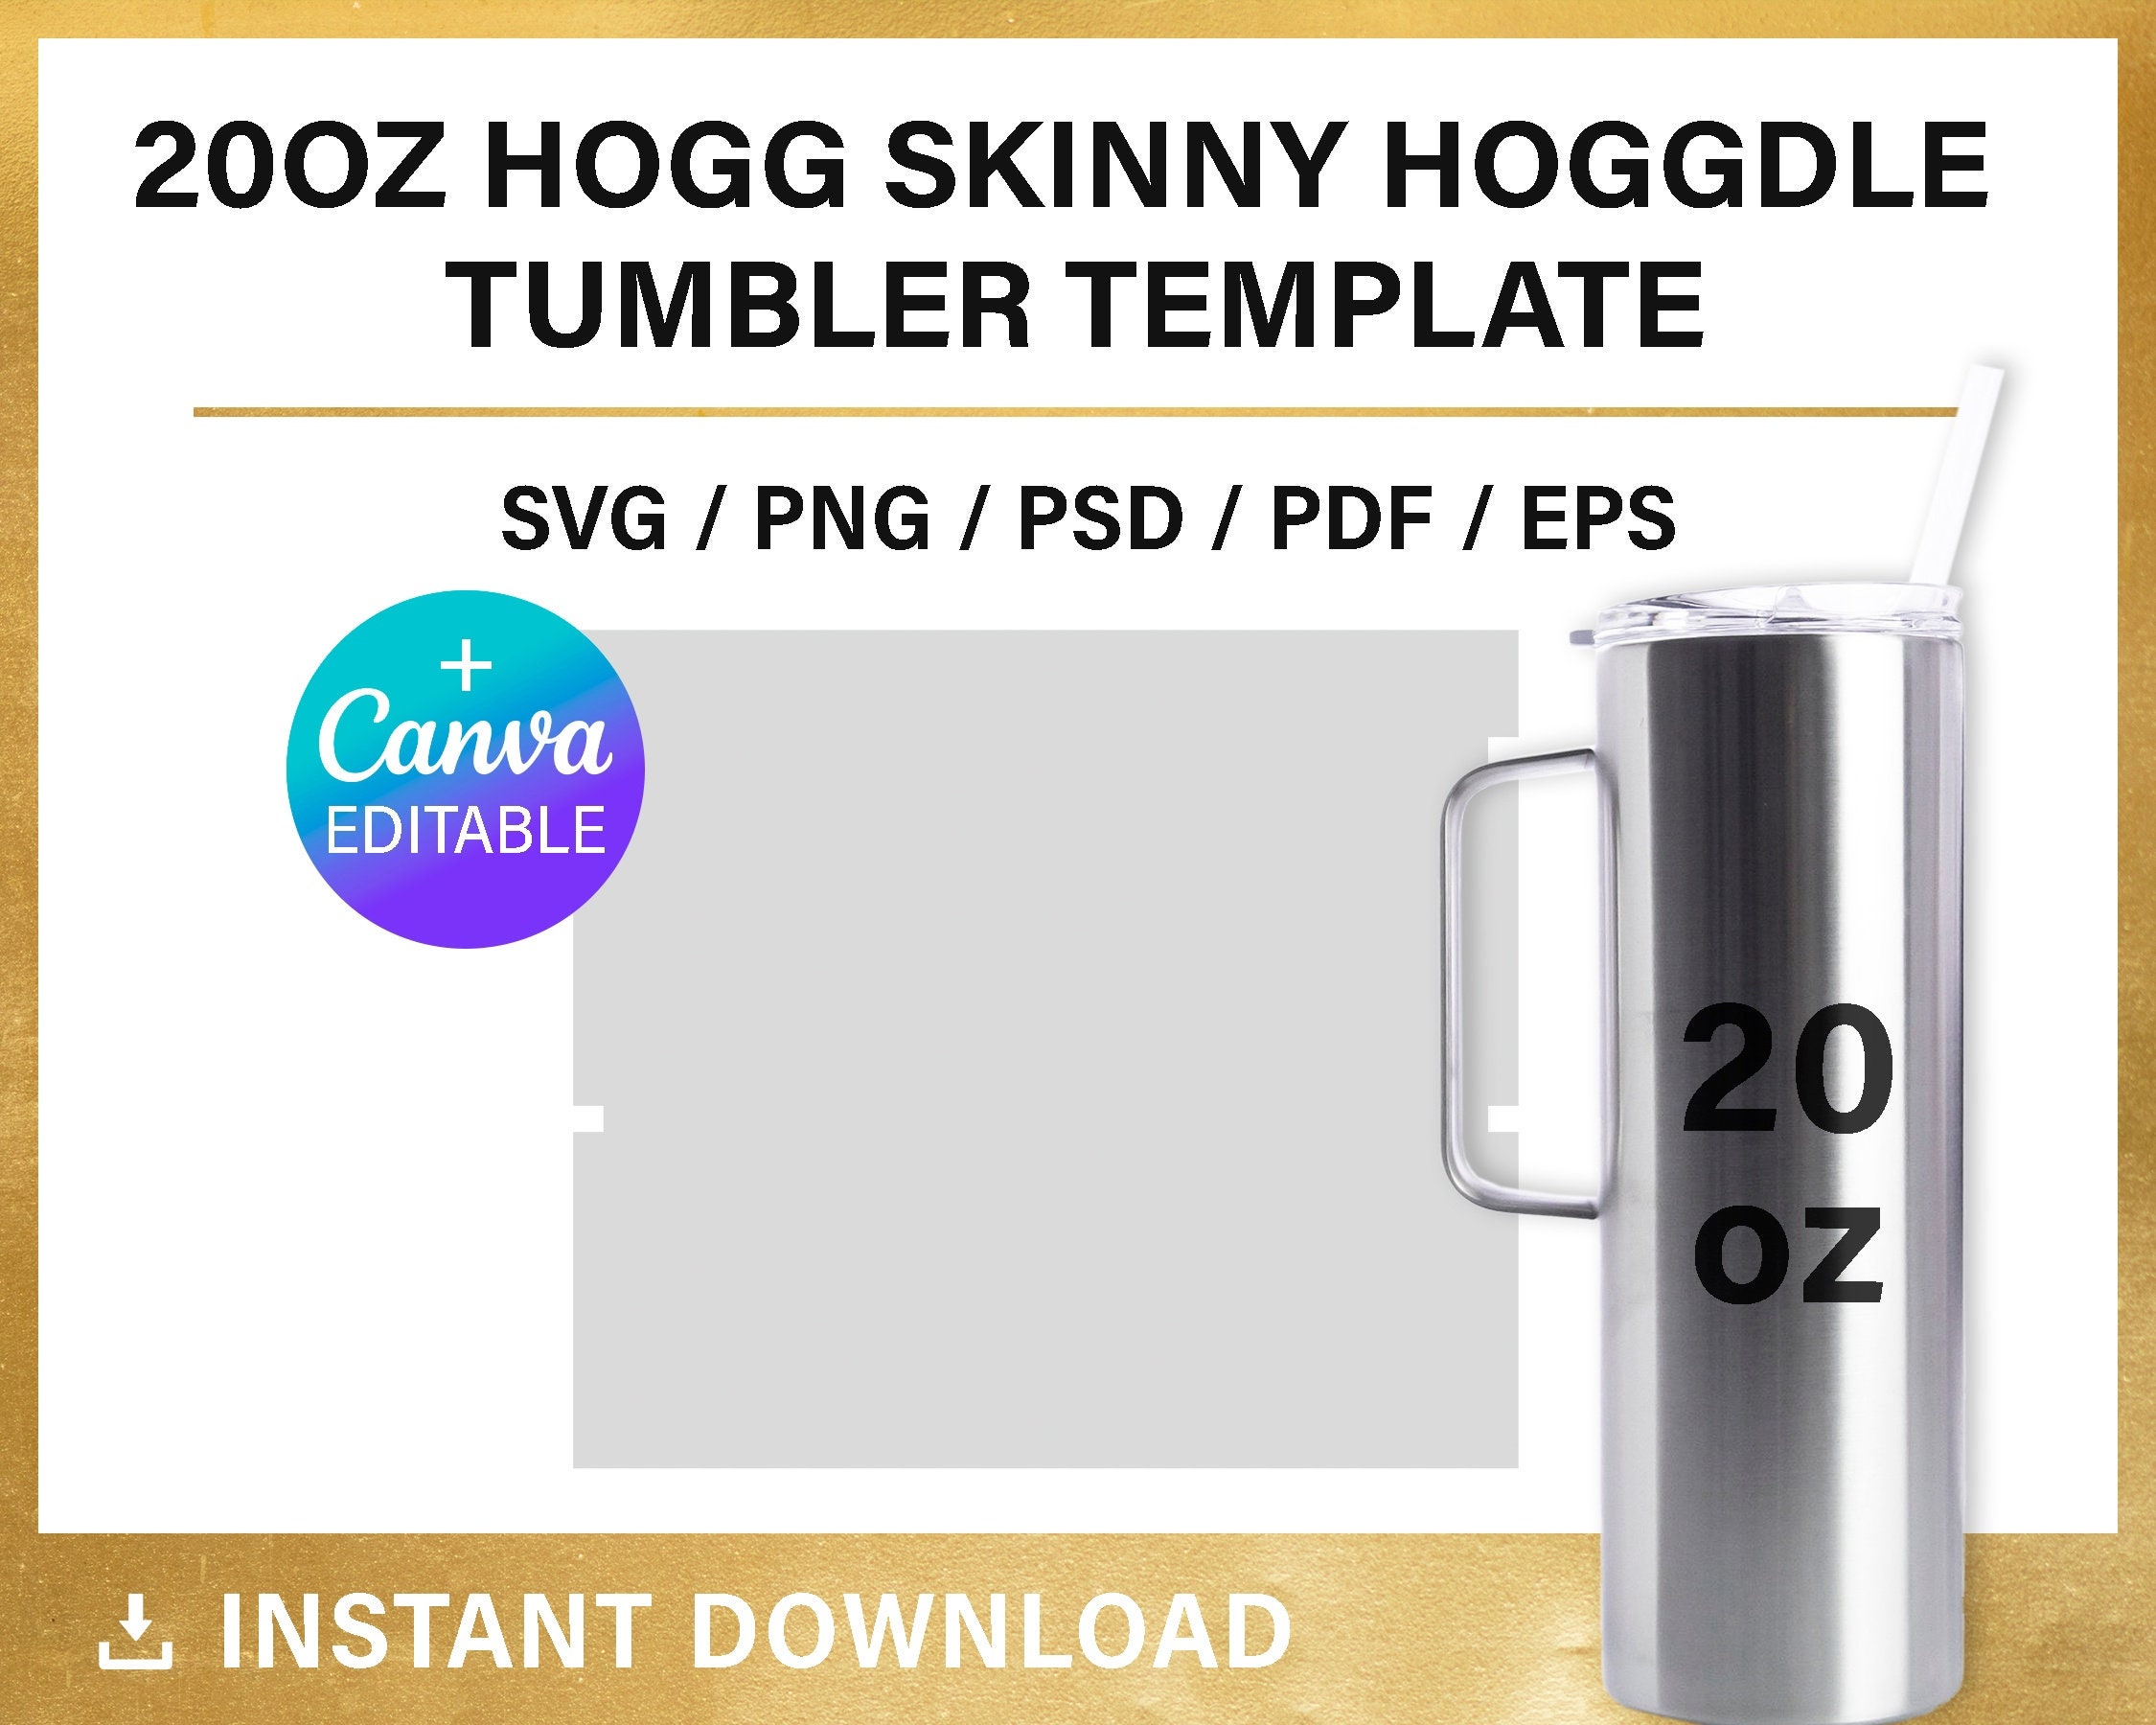 30oz Ozark Trail Tumbler BLANK Template for Sublimation, Full Wrap, 30 Oz,  for Photoshop, for Cricut, for Canva, Png, Svg, Instant Download (Instant  Download) 